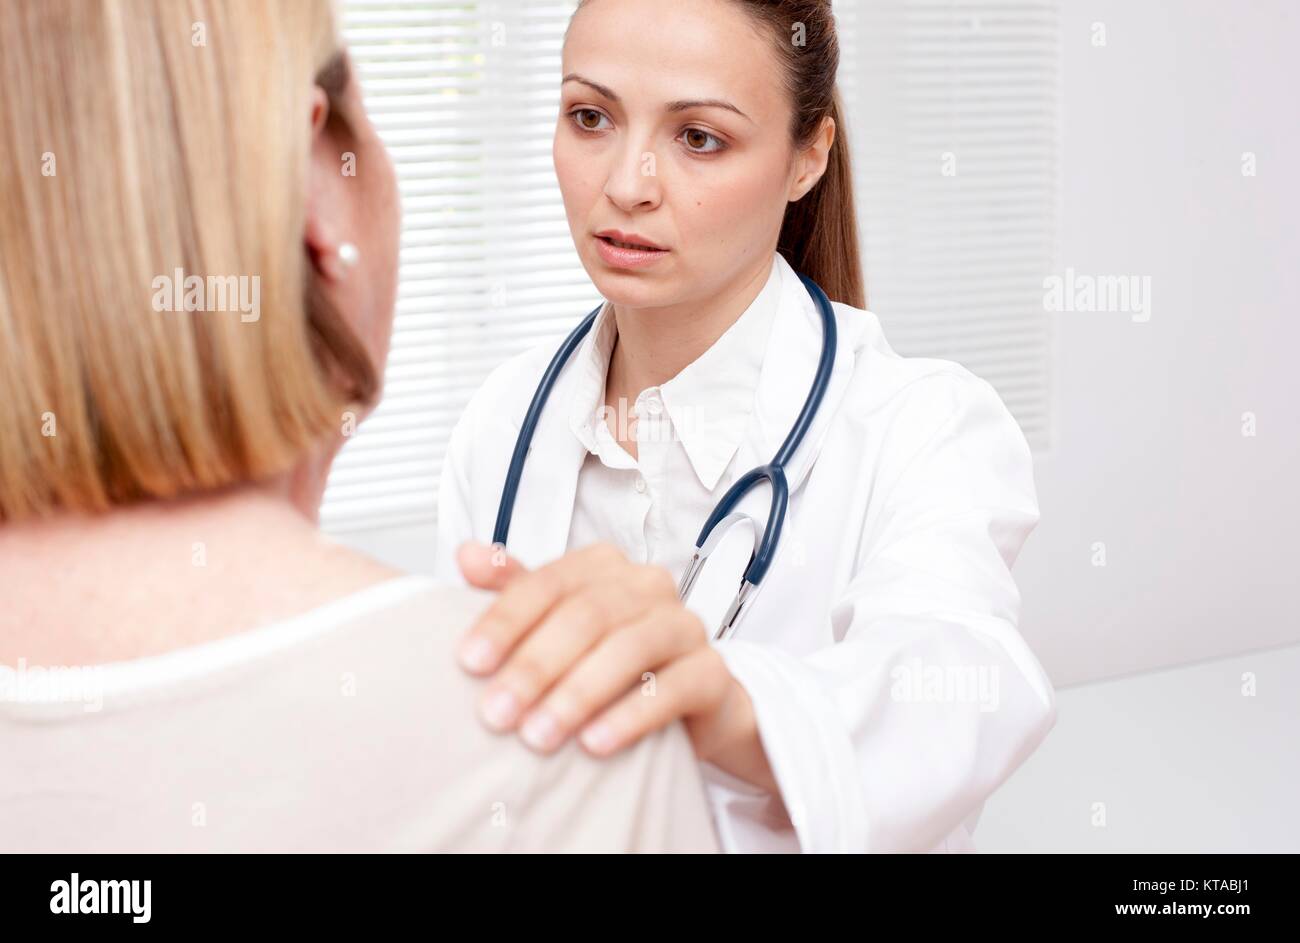 Female doctor with senior female patient. Stock Photo